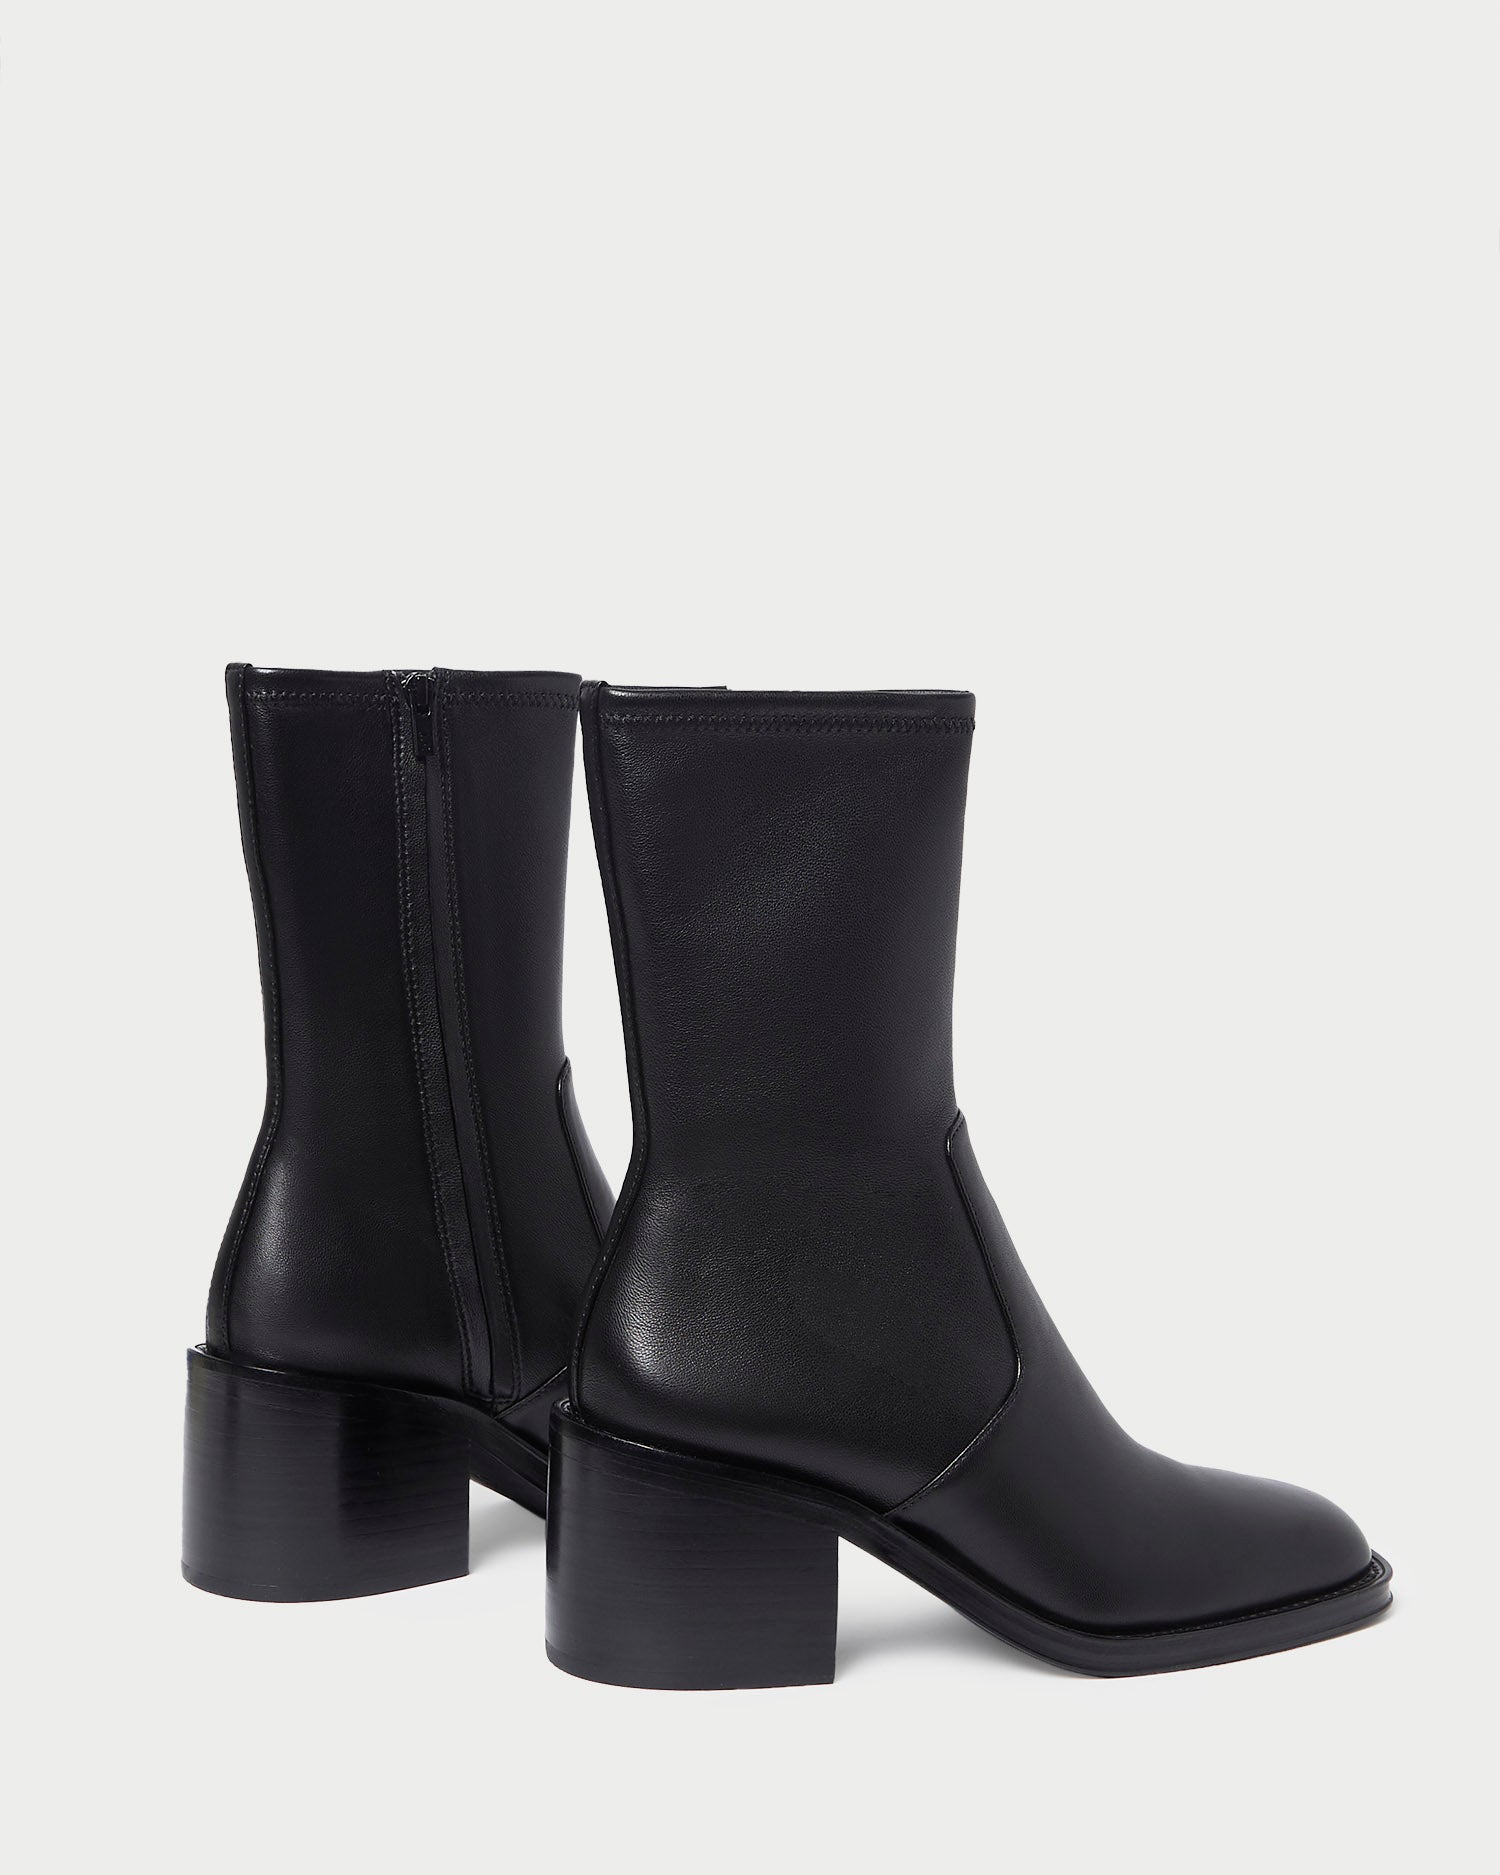 Buy Only Black Heeled Ankle Boot from the Next UK online shop